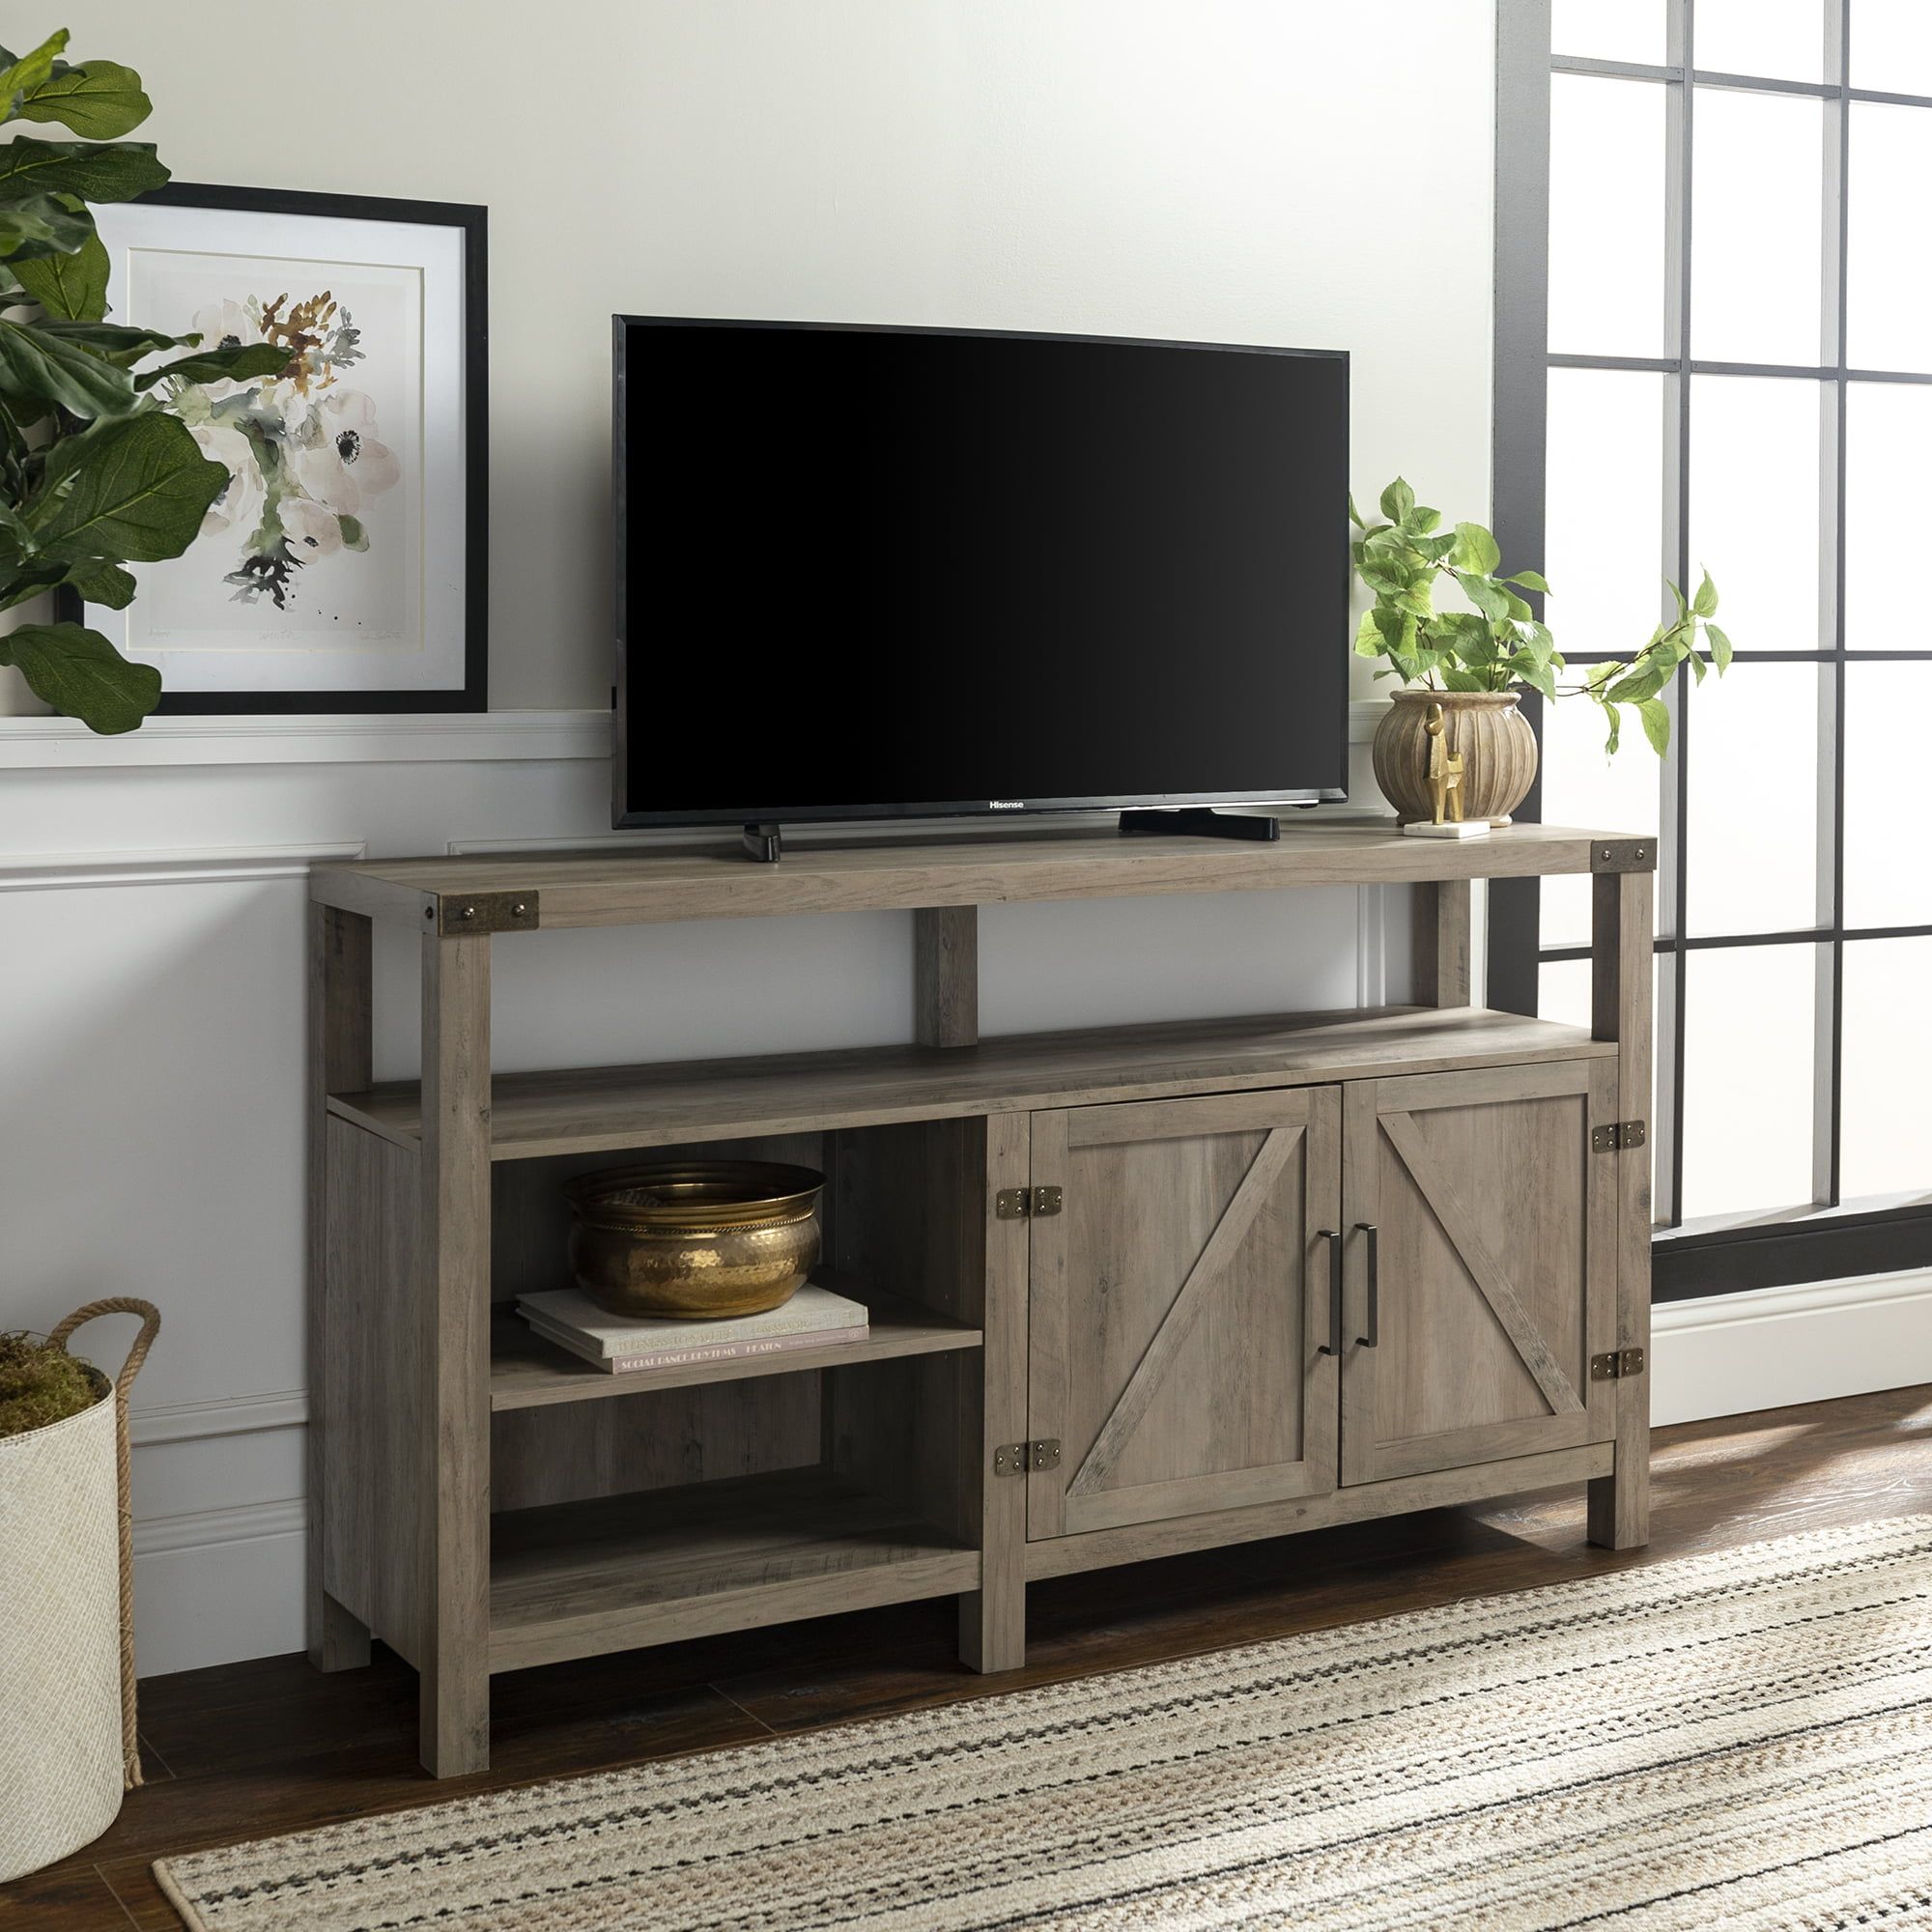 Manor Park Modern Farmhouse Tall Barn Door Tv Stand For Tv's Up To 64 In Modern Farmhouse Rustic Tv Stands (View 10 of 20)